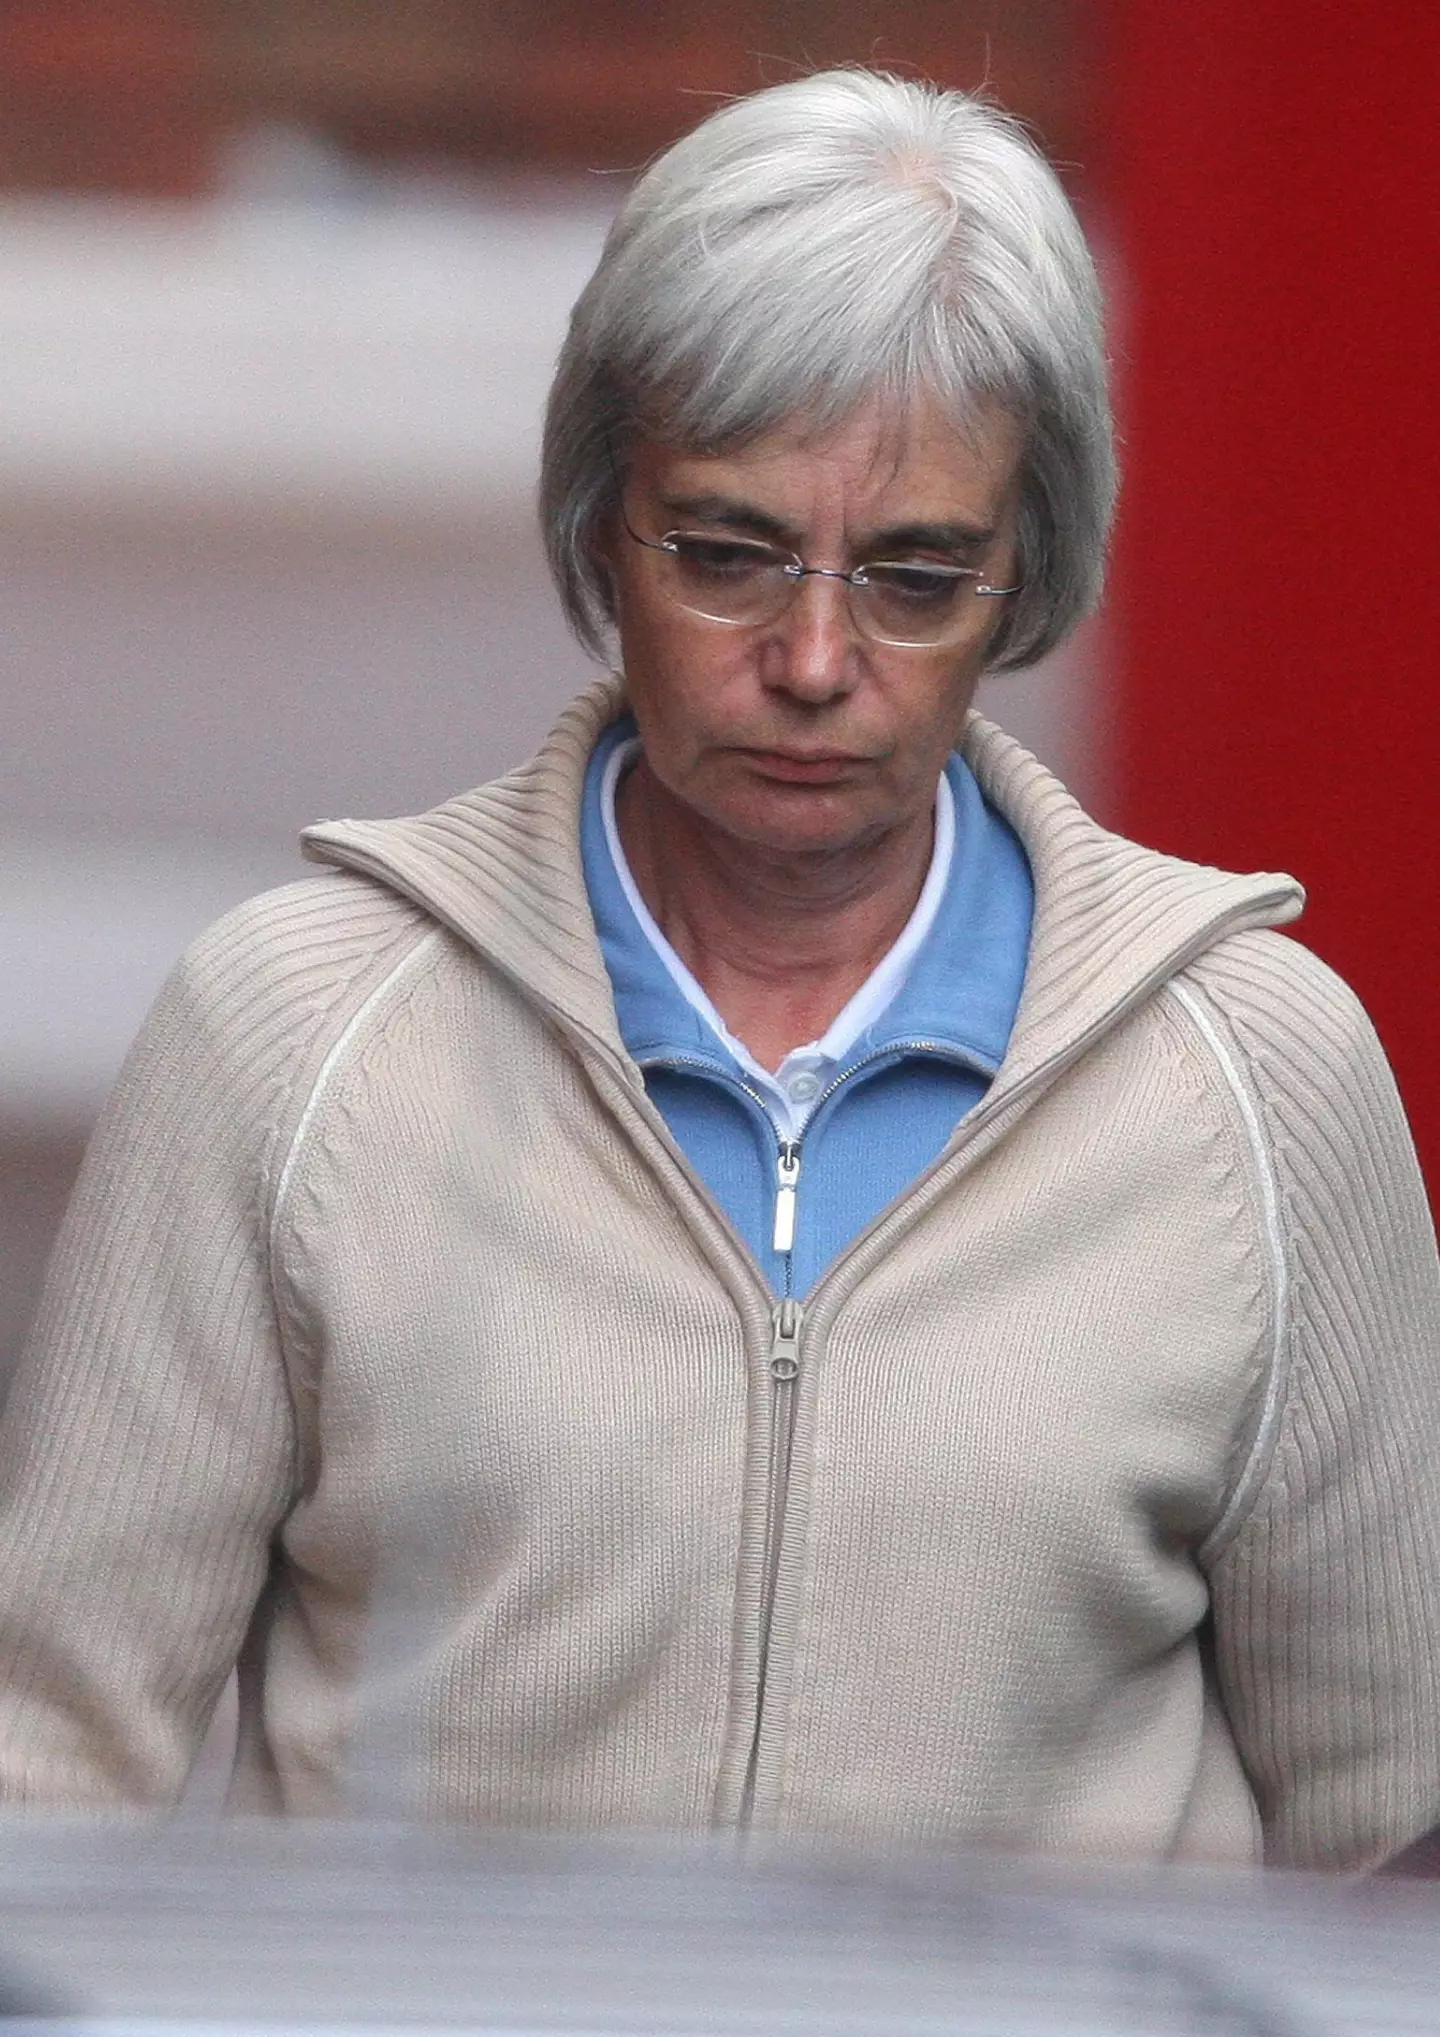 Anne was photographed with grey hair during her court case. (